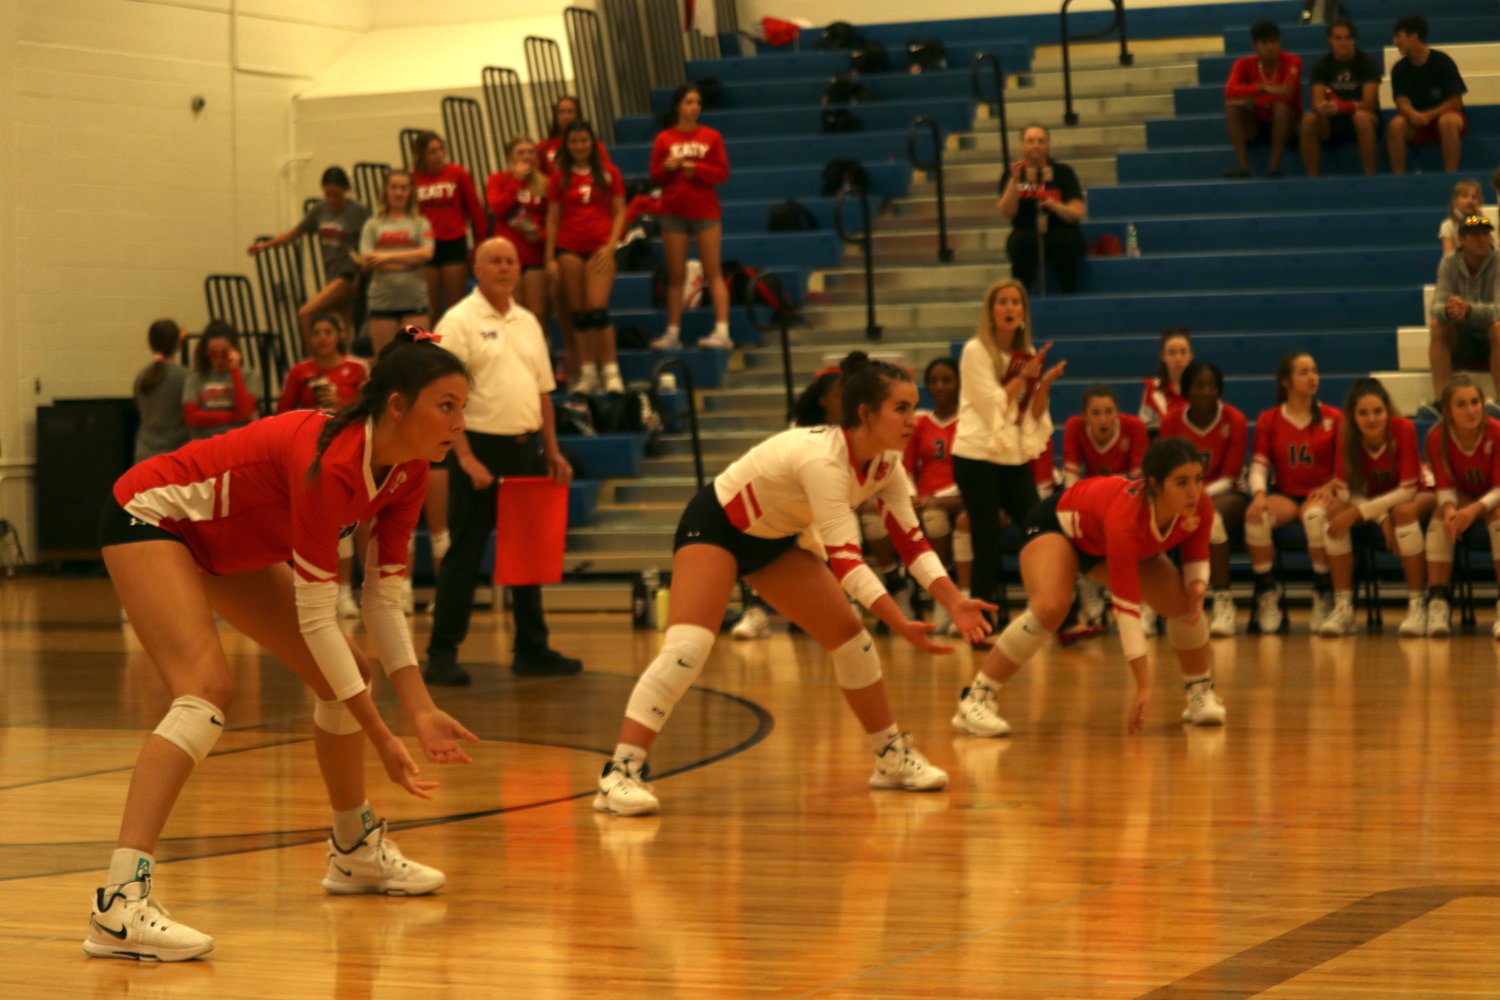 The back line of Katy players prepares for a serve as head coach Karen Paxton tells the team instructions during a District 19-6A match between Katy and Taylor at the Taylor gym.